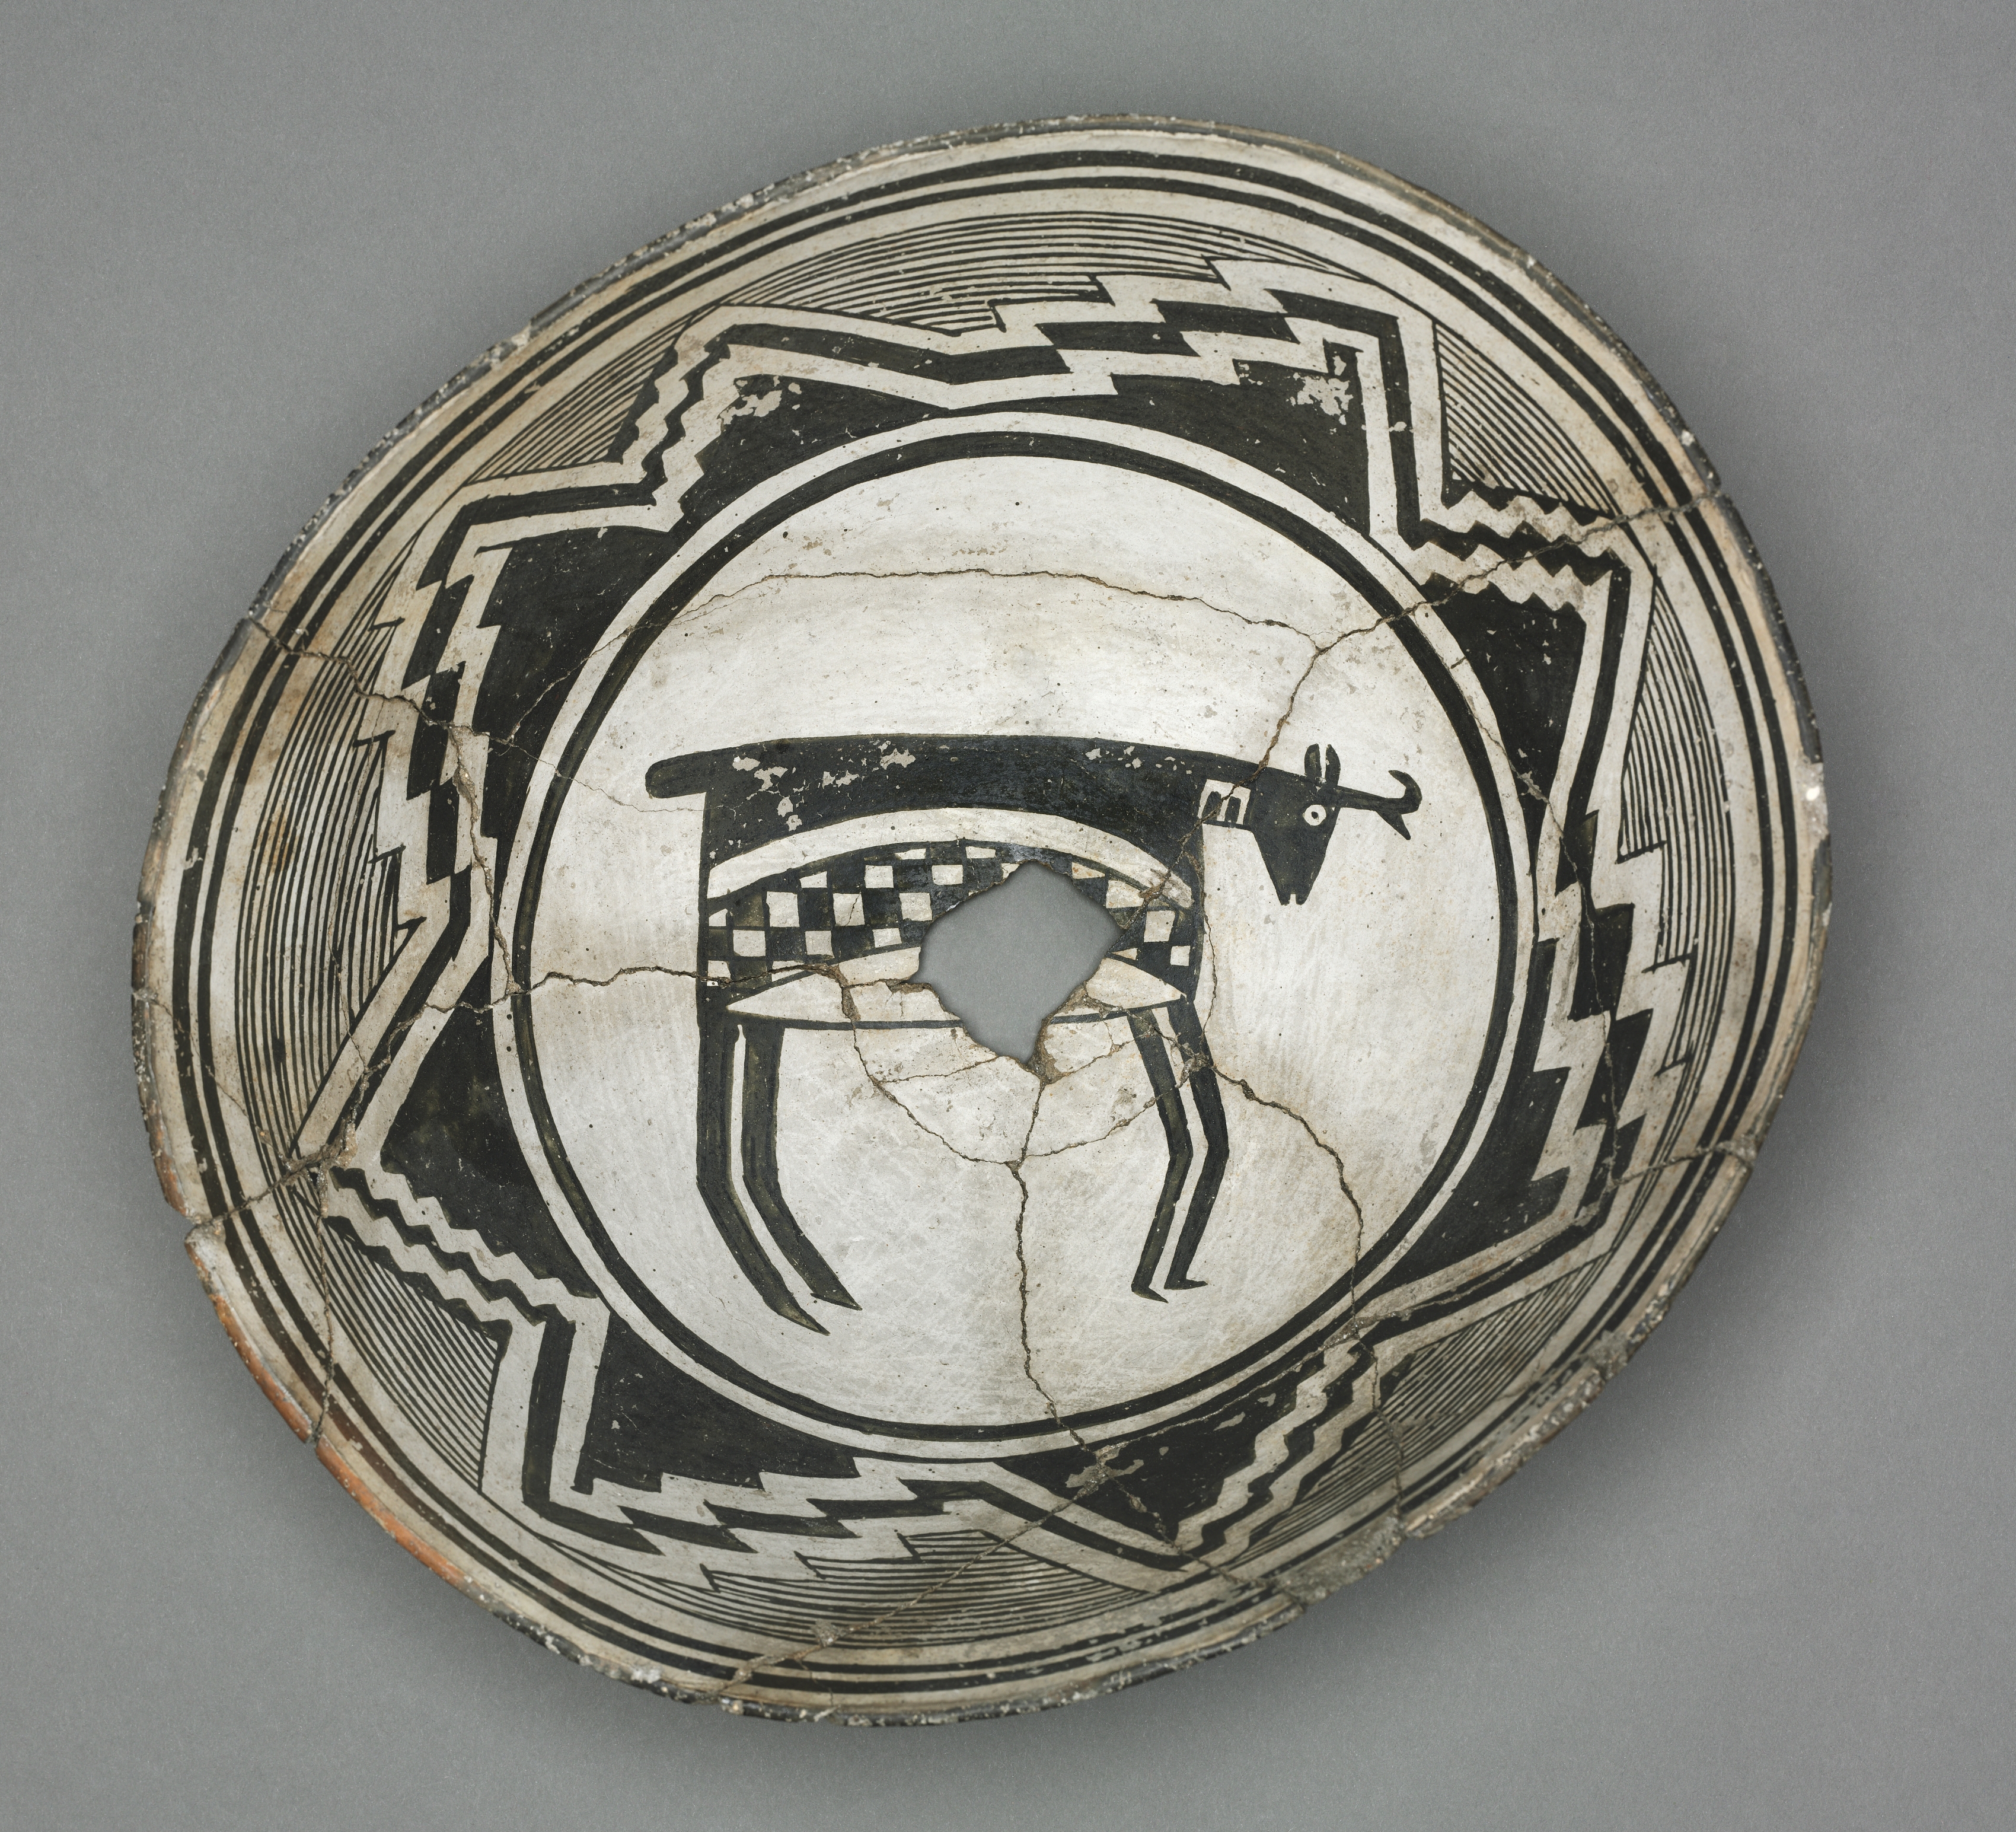 Bowl with Pronghorn Antelope and Geometric Design